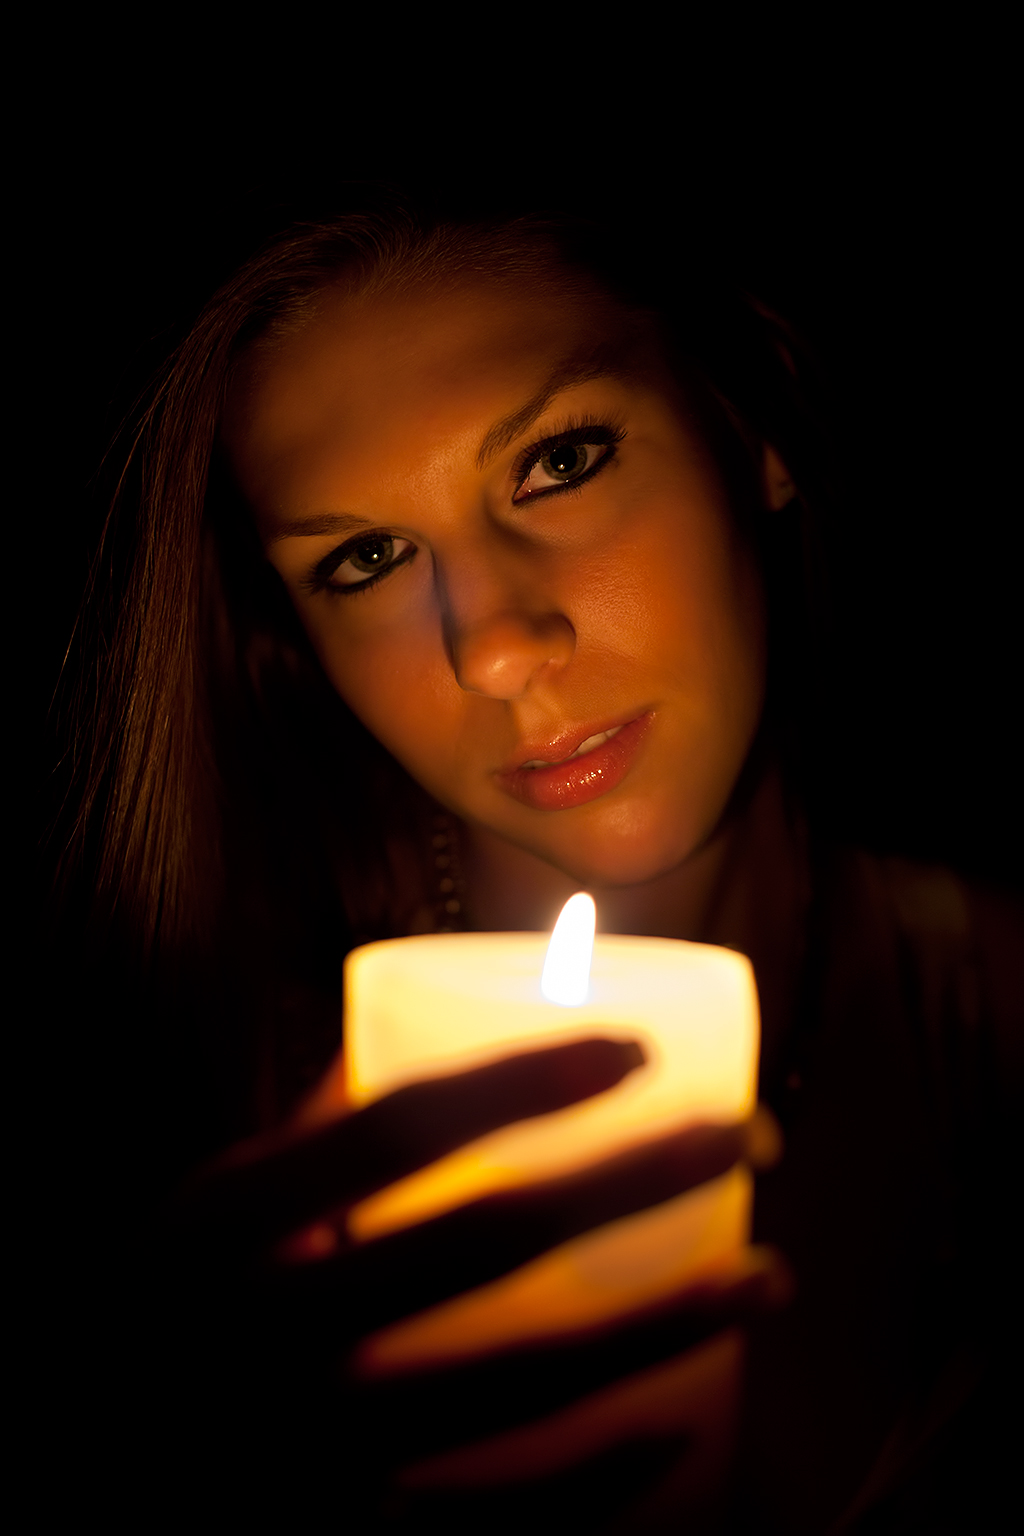 the woman is holding a candle that has not been lit